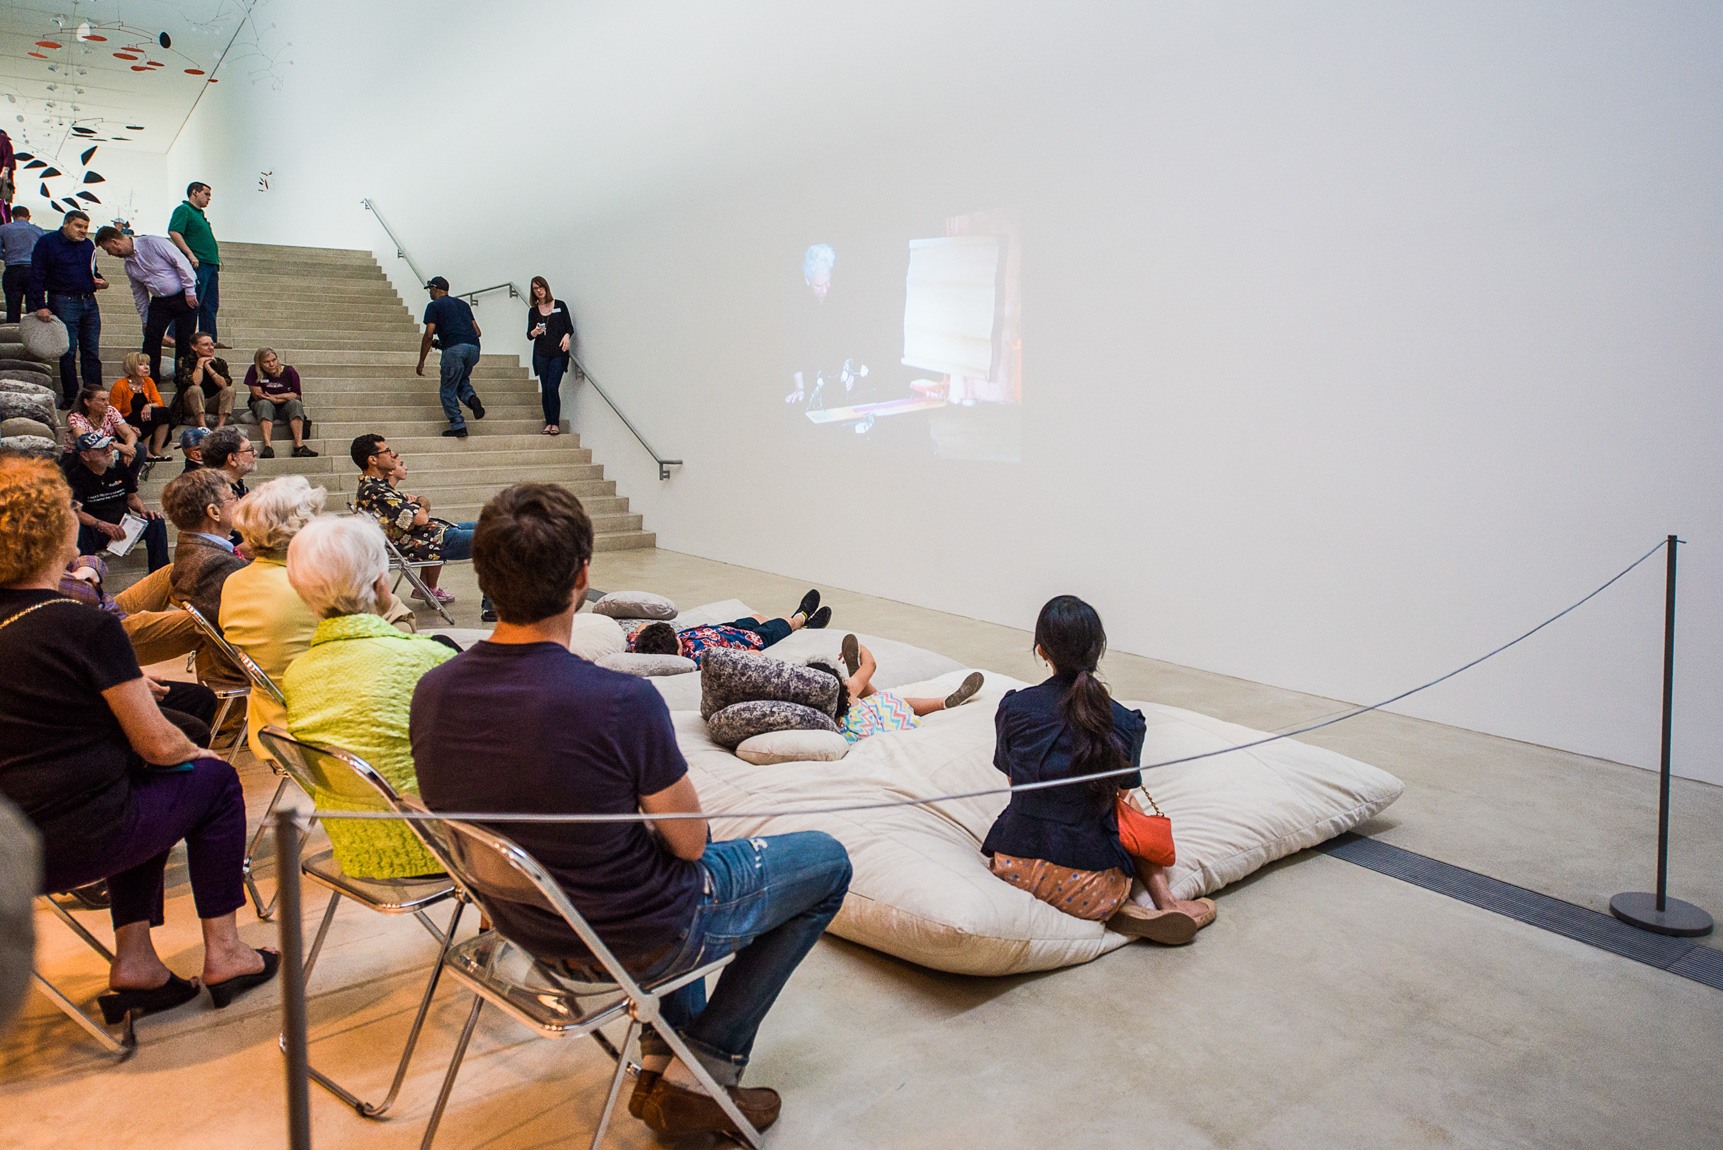 An audience, some seated in chairs and some lying on a large cushion, watches a film projected on the wall of the Lower-Main Gallery.